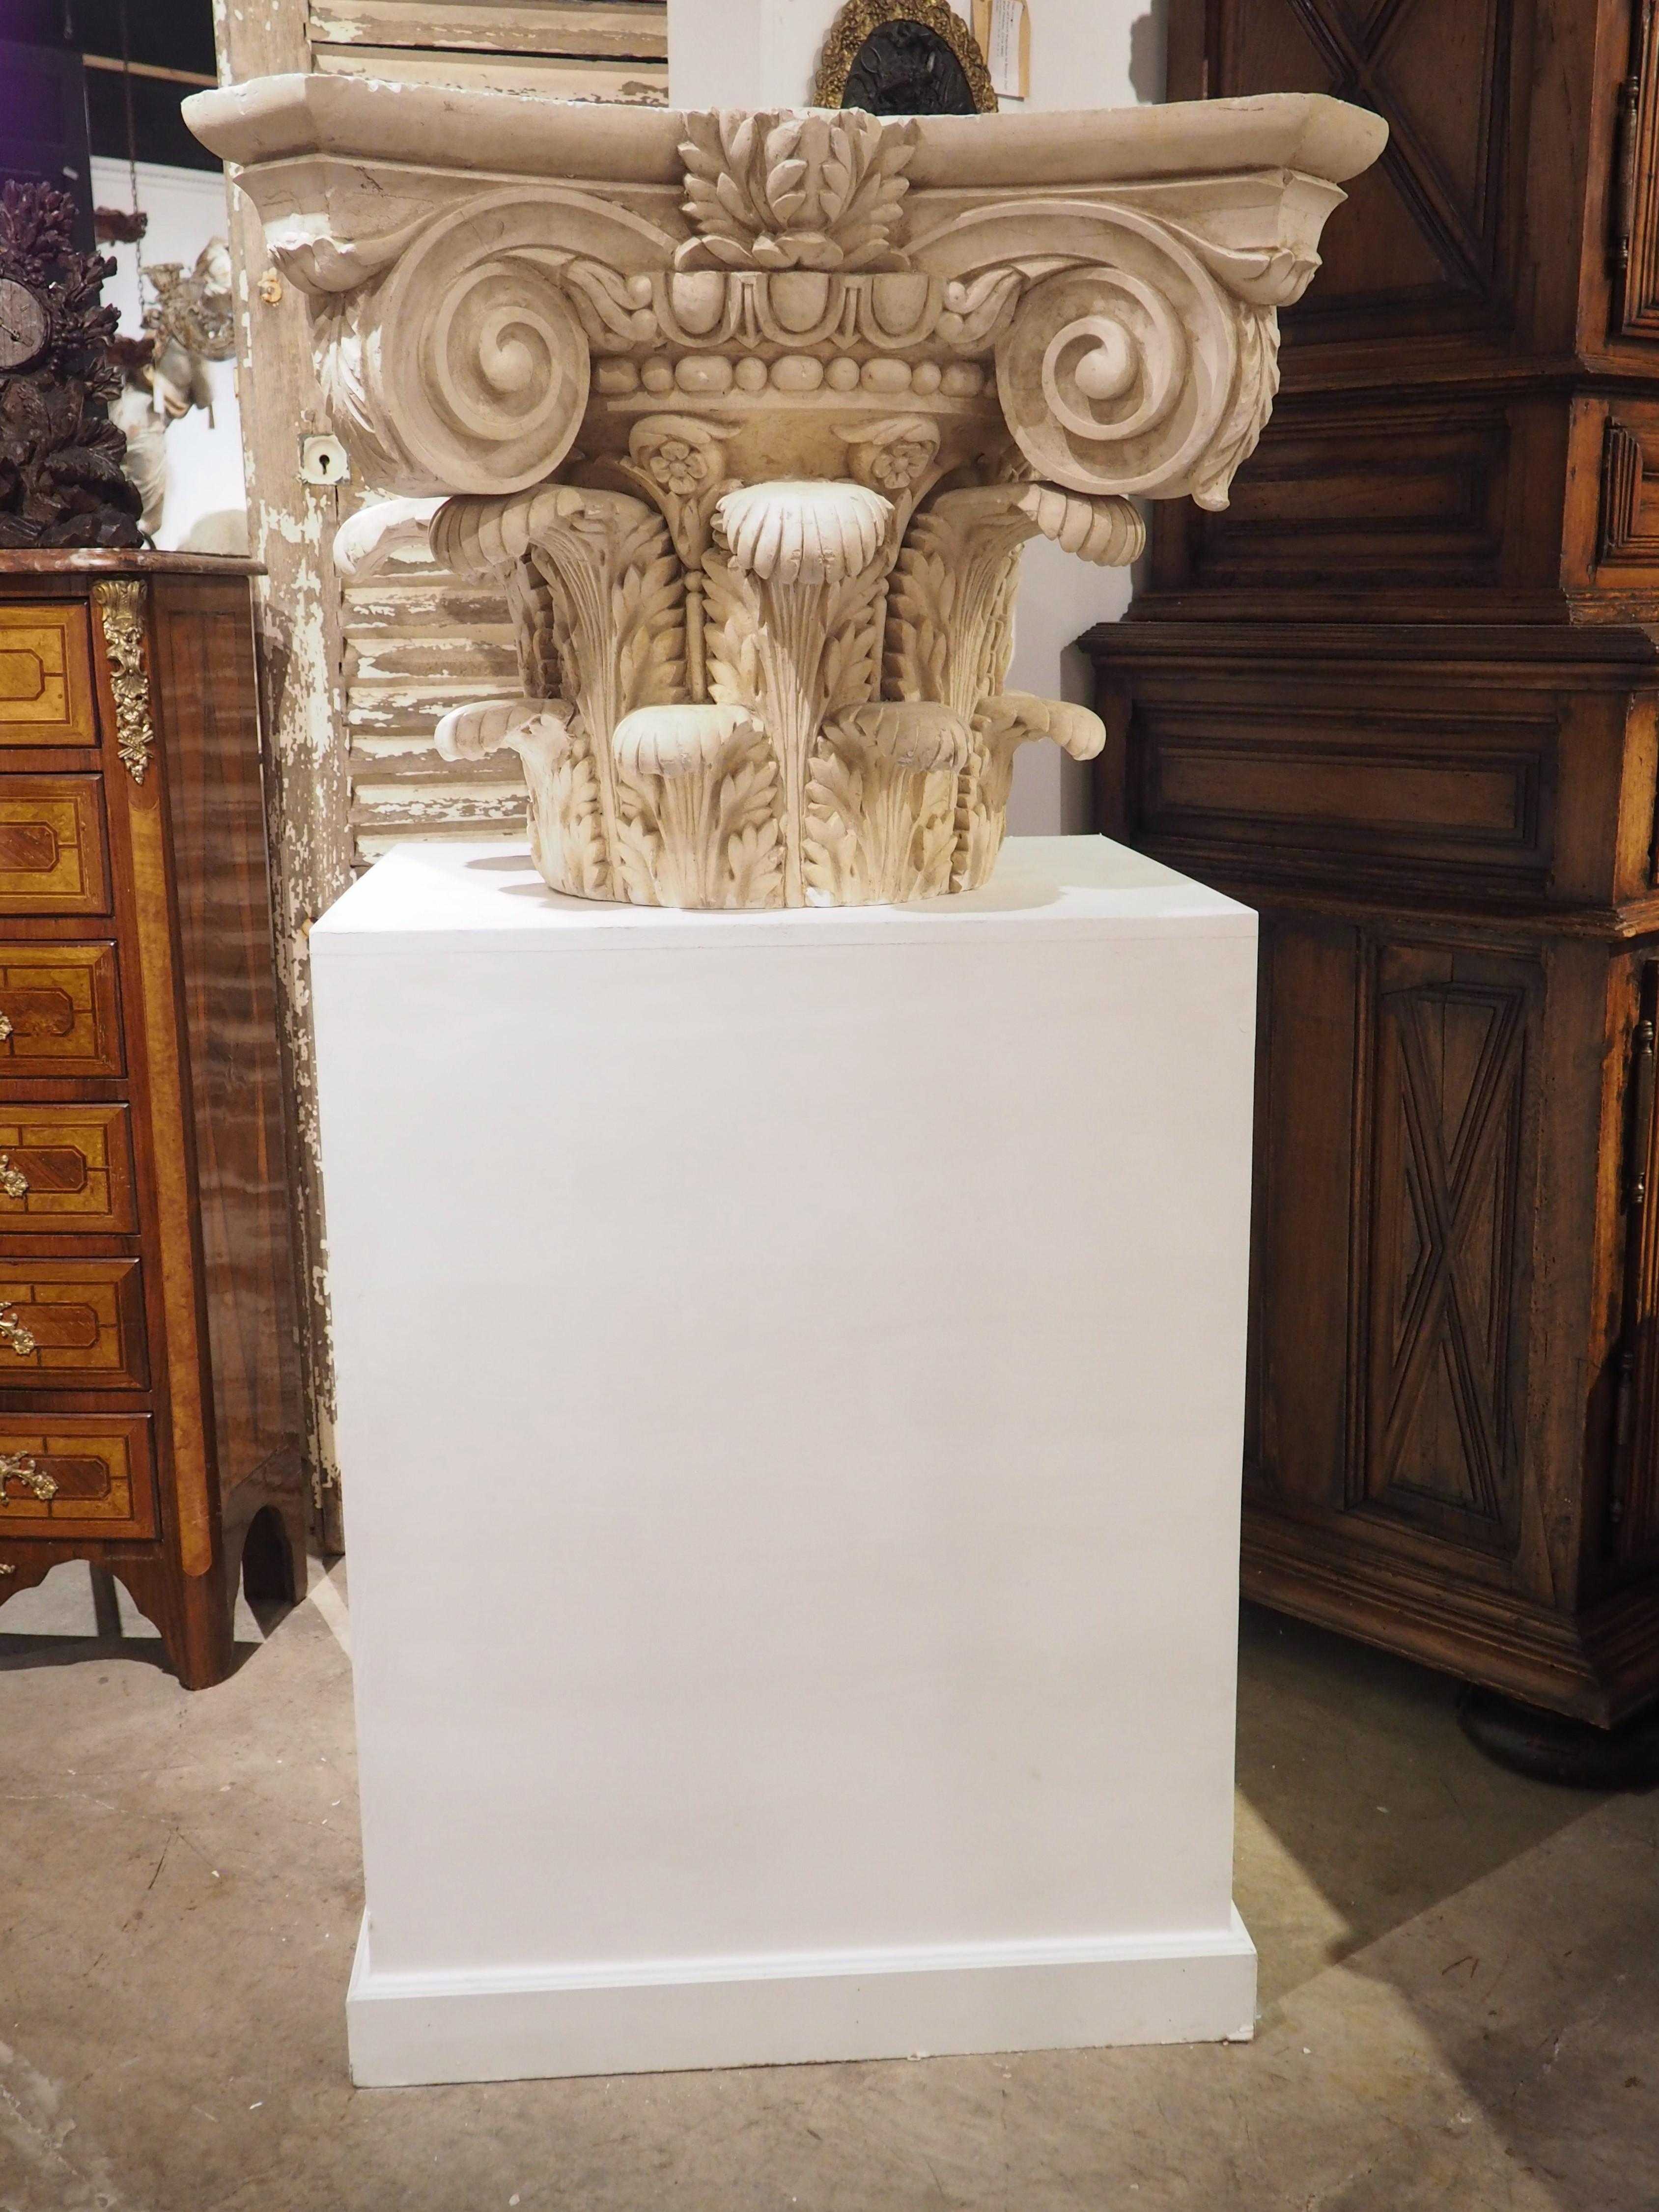 Worked in the neoclassical style in France in the early 1900’s, this large plaster capital on wooden pedestal is of the Composite order. Composite order is a style of architecture that is associated with Imperial Rome, with the oldest surviving